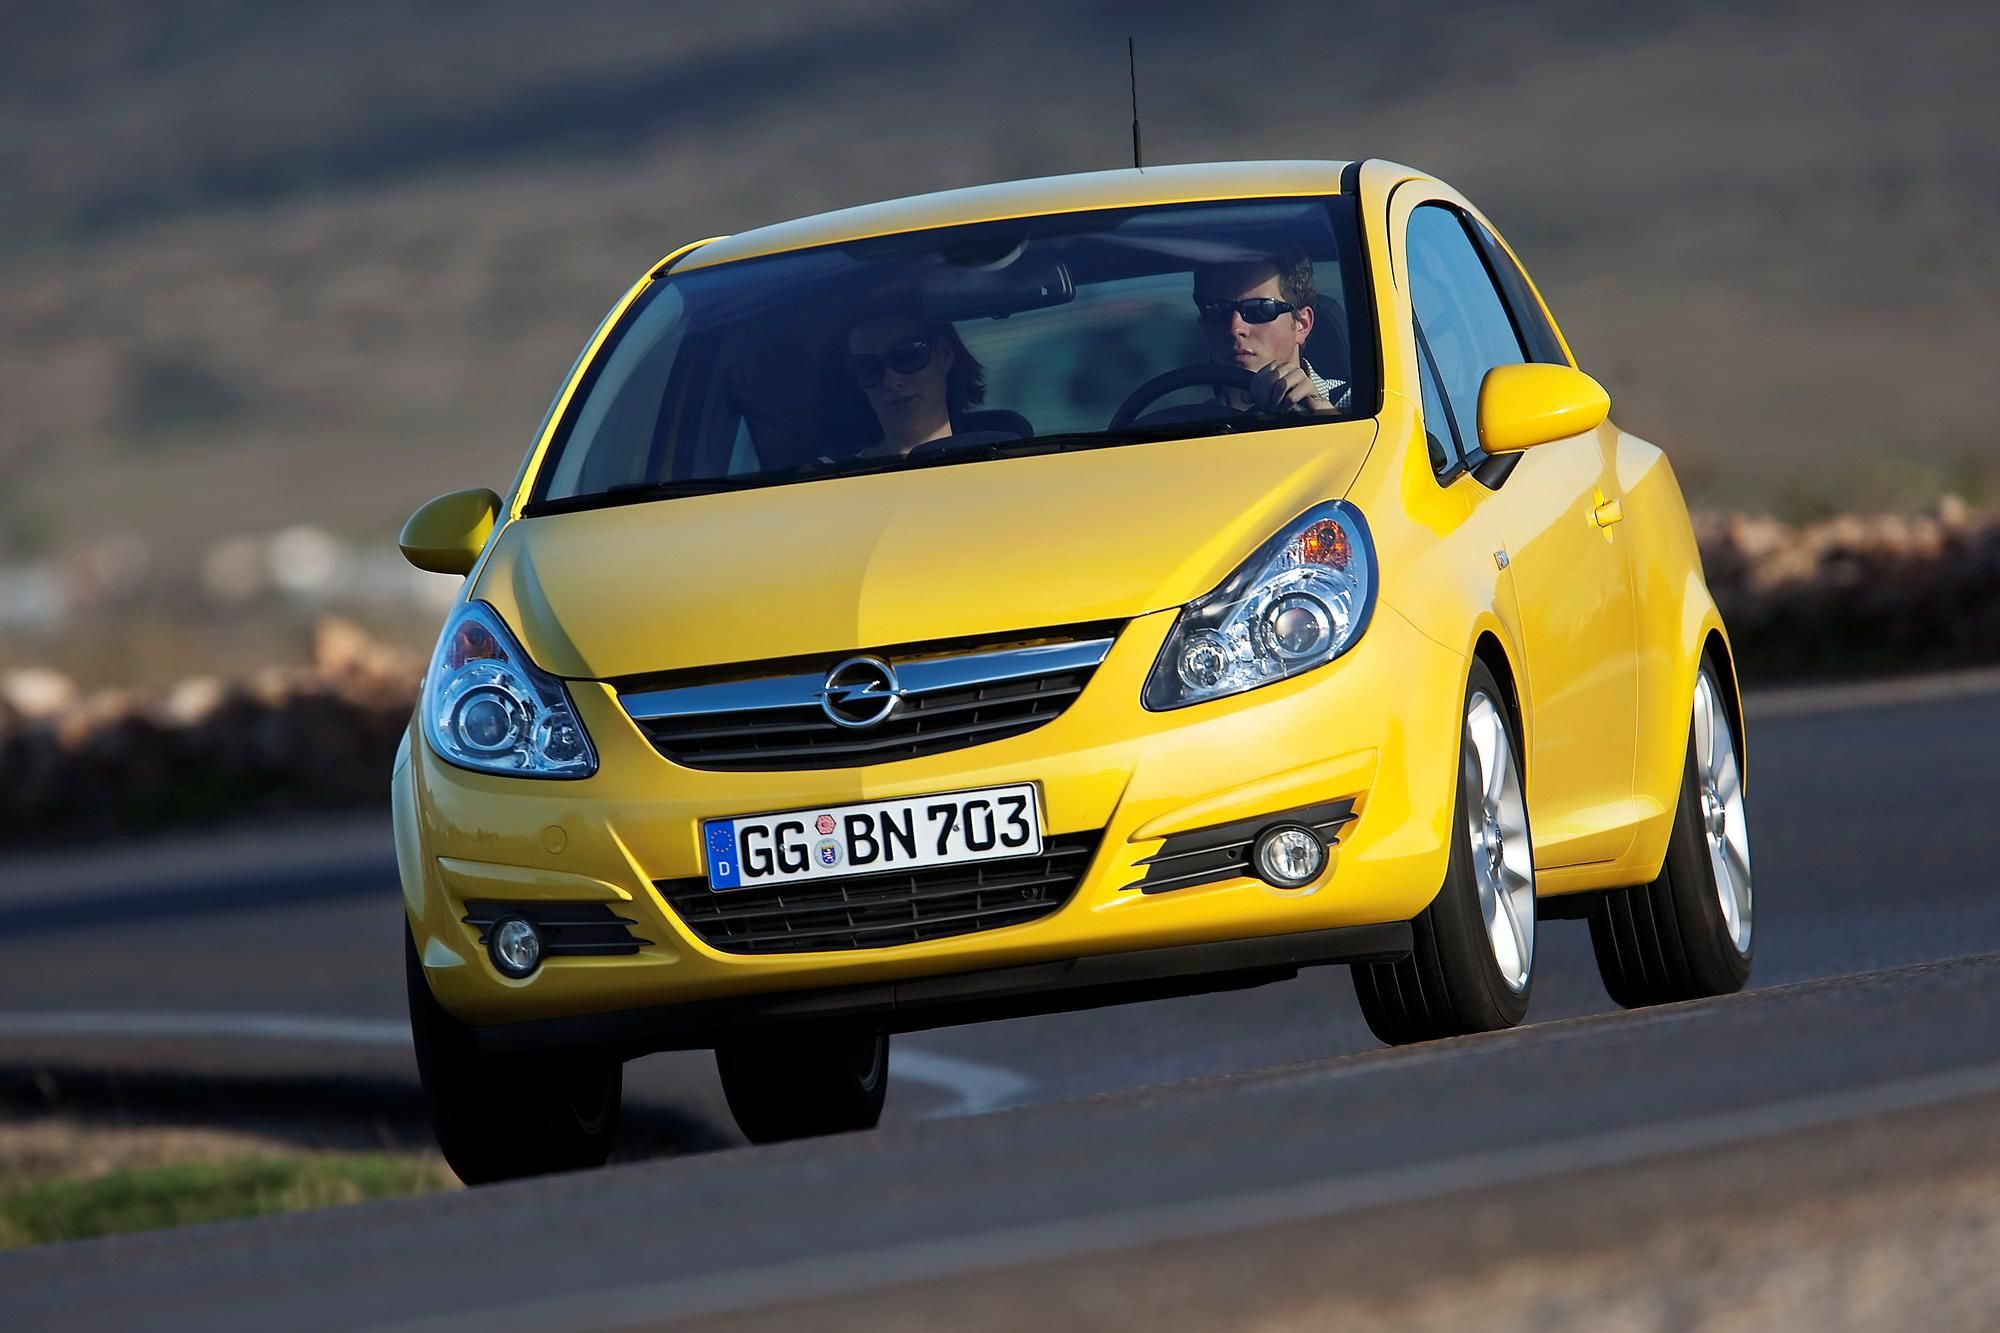 Opel Corsa (2010) - picture 28 of 30